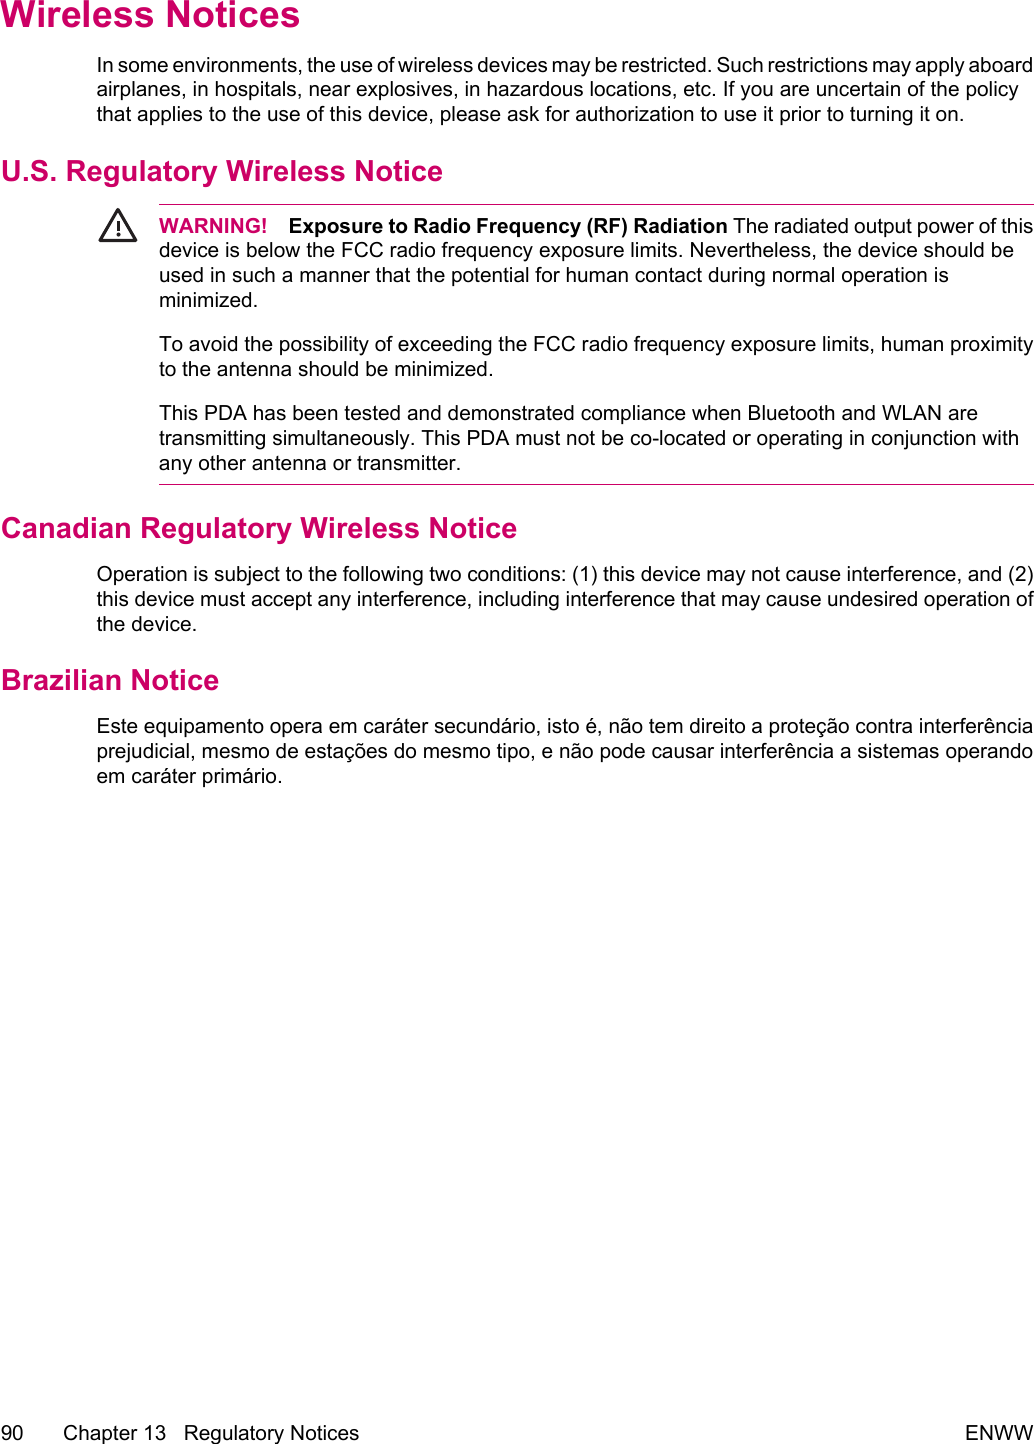 Wireless NoticesIn some environments, the use of wireless devices may be restricted. Such restrictions may apply aboardairplanes, in hospitals, near explosives, in hazardous locations, etc. If you are uncertain of the policythat applies to the use of this device, please ask for authorization to use it prior to turning it on.U.S. Regulatory Wireless NoticeWARNING! Exposure to Radio Frequency (RF) Radiation The radiated output power of thisdevice is below the FCC radio frequency exposure limits. Nevertheless, the device should beused in such a manner that the potential for human contact during normal operation isminimized. To avoid the possibility of exceeding the FCC radio frequency exposure limits, human proximityto the antenna should be minimized.This PDA has been tested and demonstrated compliance when Bluetooth and WLAN aretransmitting simultaneously. This PDA must not be co-located or operating in conjunction withany other antenna or transmitter.Canadian Regulatory Wireless NoticeOperation is subject to the following two conditions: (1) this device may not cause interference, and (2)this device must accept any interference, including interference that may cause undesired operation ofthe device.Brazilian NoticeEste equipamento opera em caráter secundário, isto é, não tem direito a proteção contra interferênciaprejudicial, mesmo de estações do mesmo tipo, e não pode causar interferência a sistemas operandoem caráter primário.90 Chapter 13   Regulatory Notices ENWW